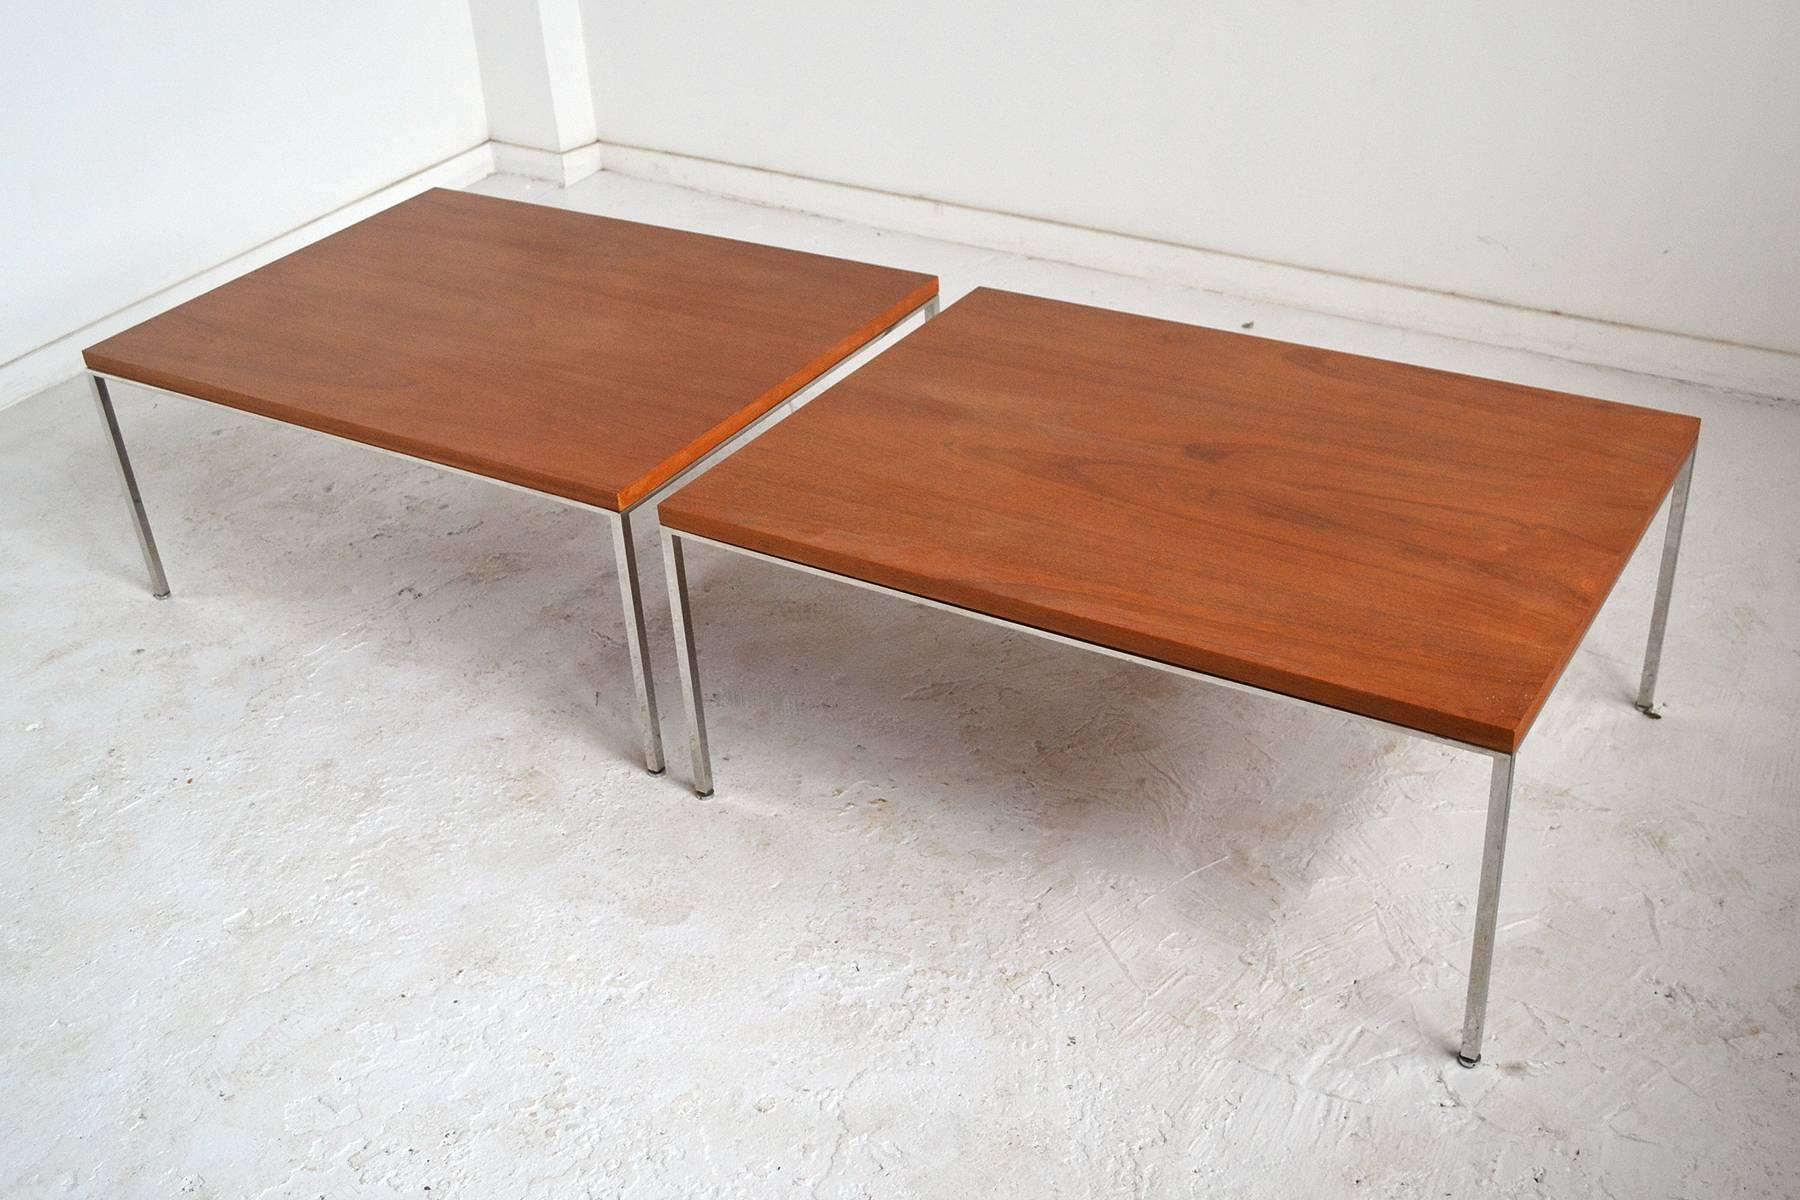 These large scaled tables by Harvey Probber have teak tops supported by chrome steel bases. The size allows them to serve as both end tables, or as coffee tables either alone or in tandem. With its spare form and subtle detailing, this late design